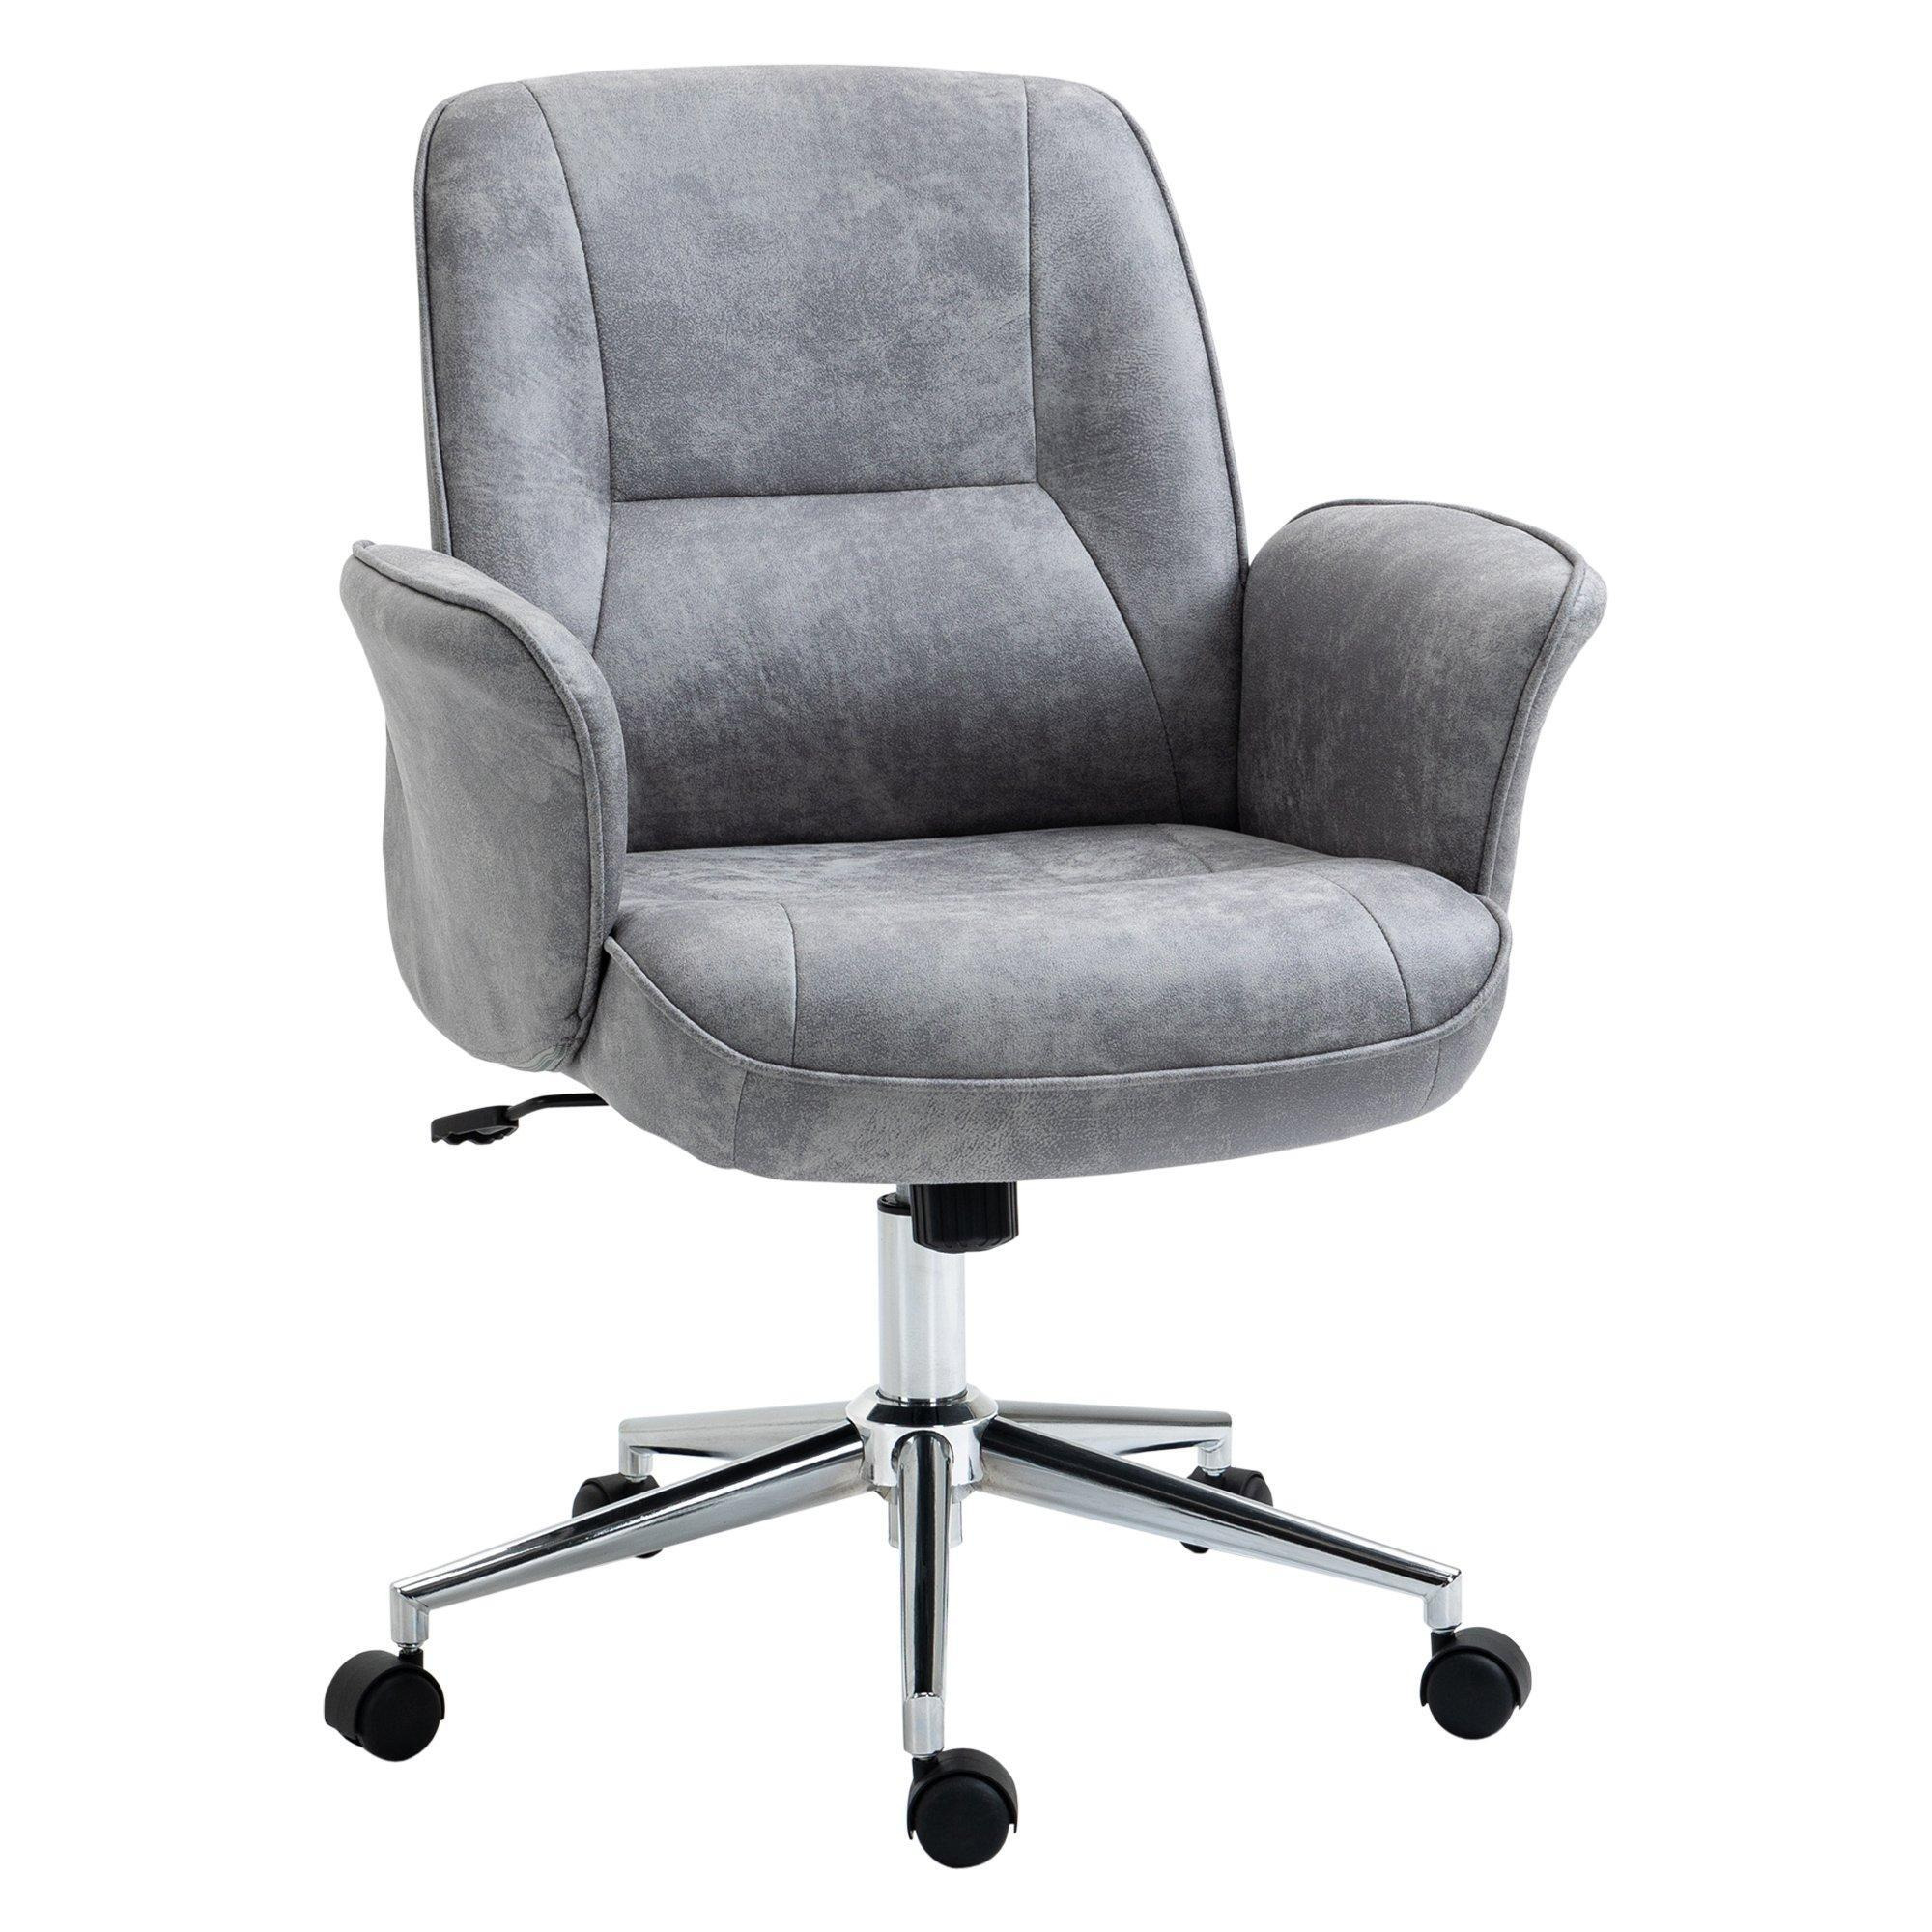 Swivel Computer Office Chair Mid Back Desk Chair Home Study Bedroom - image 1